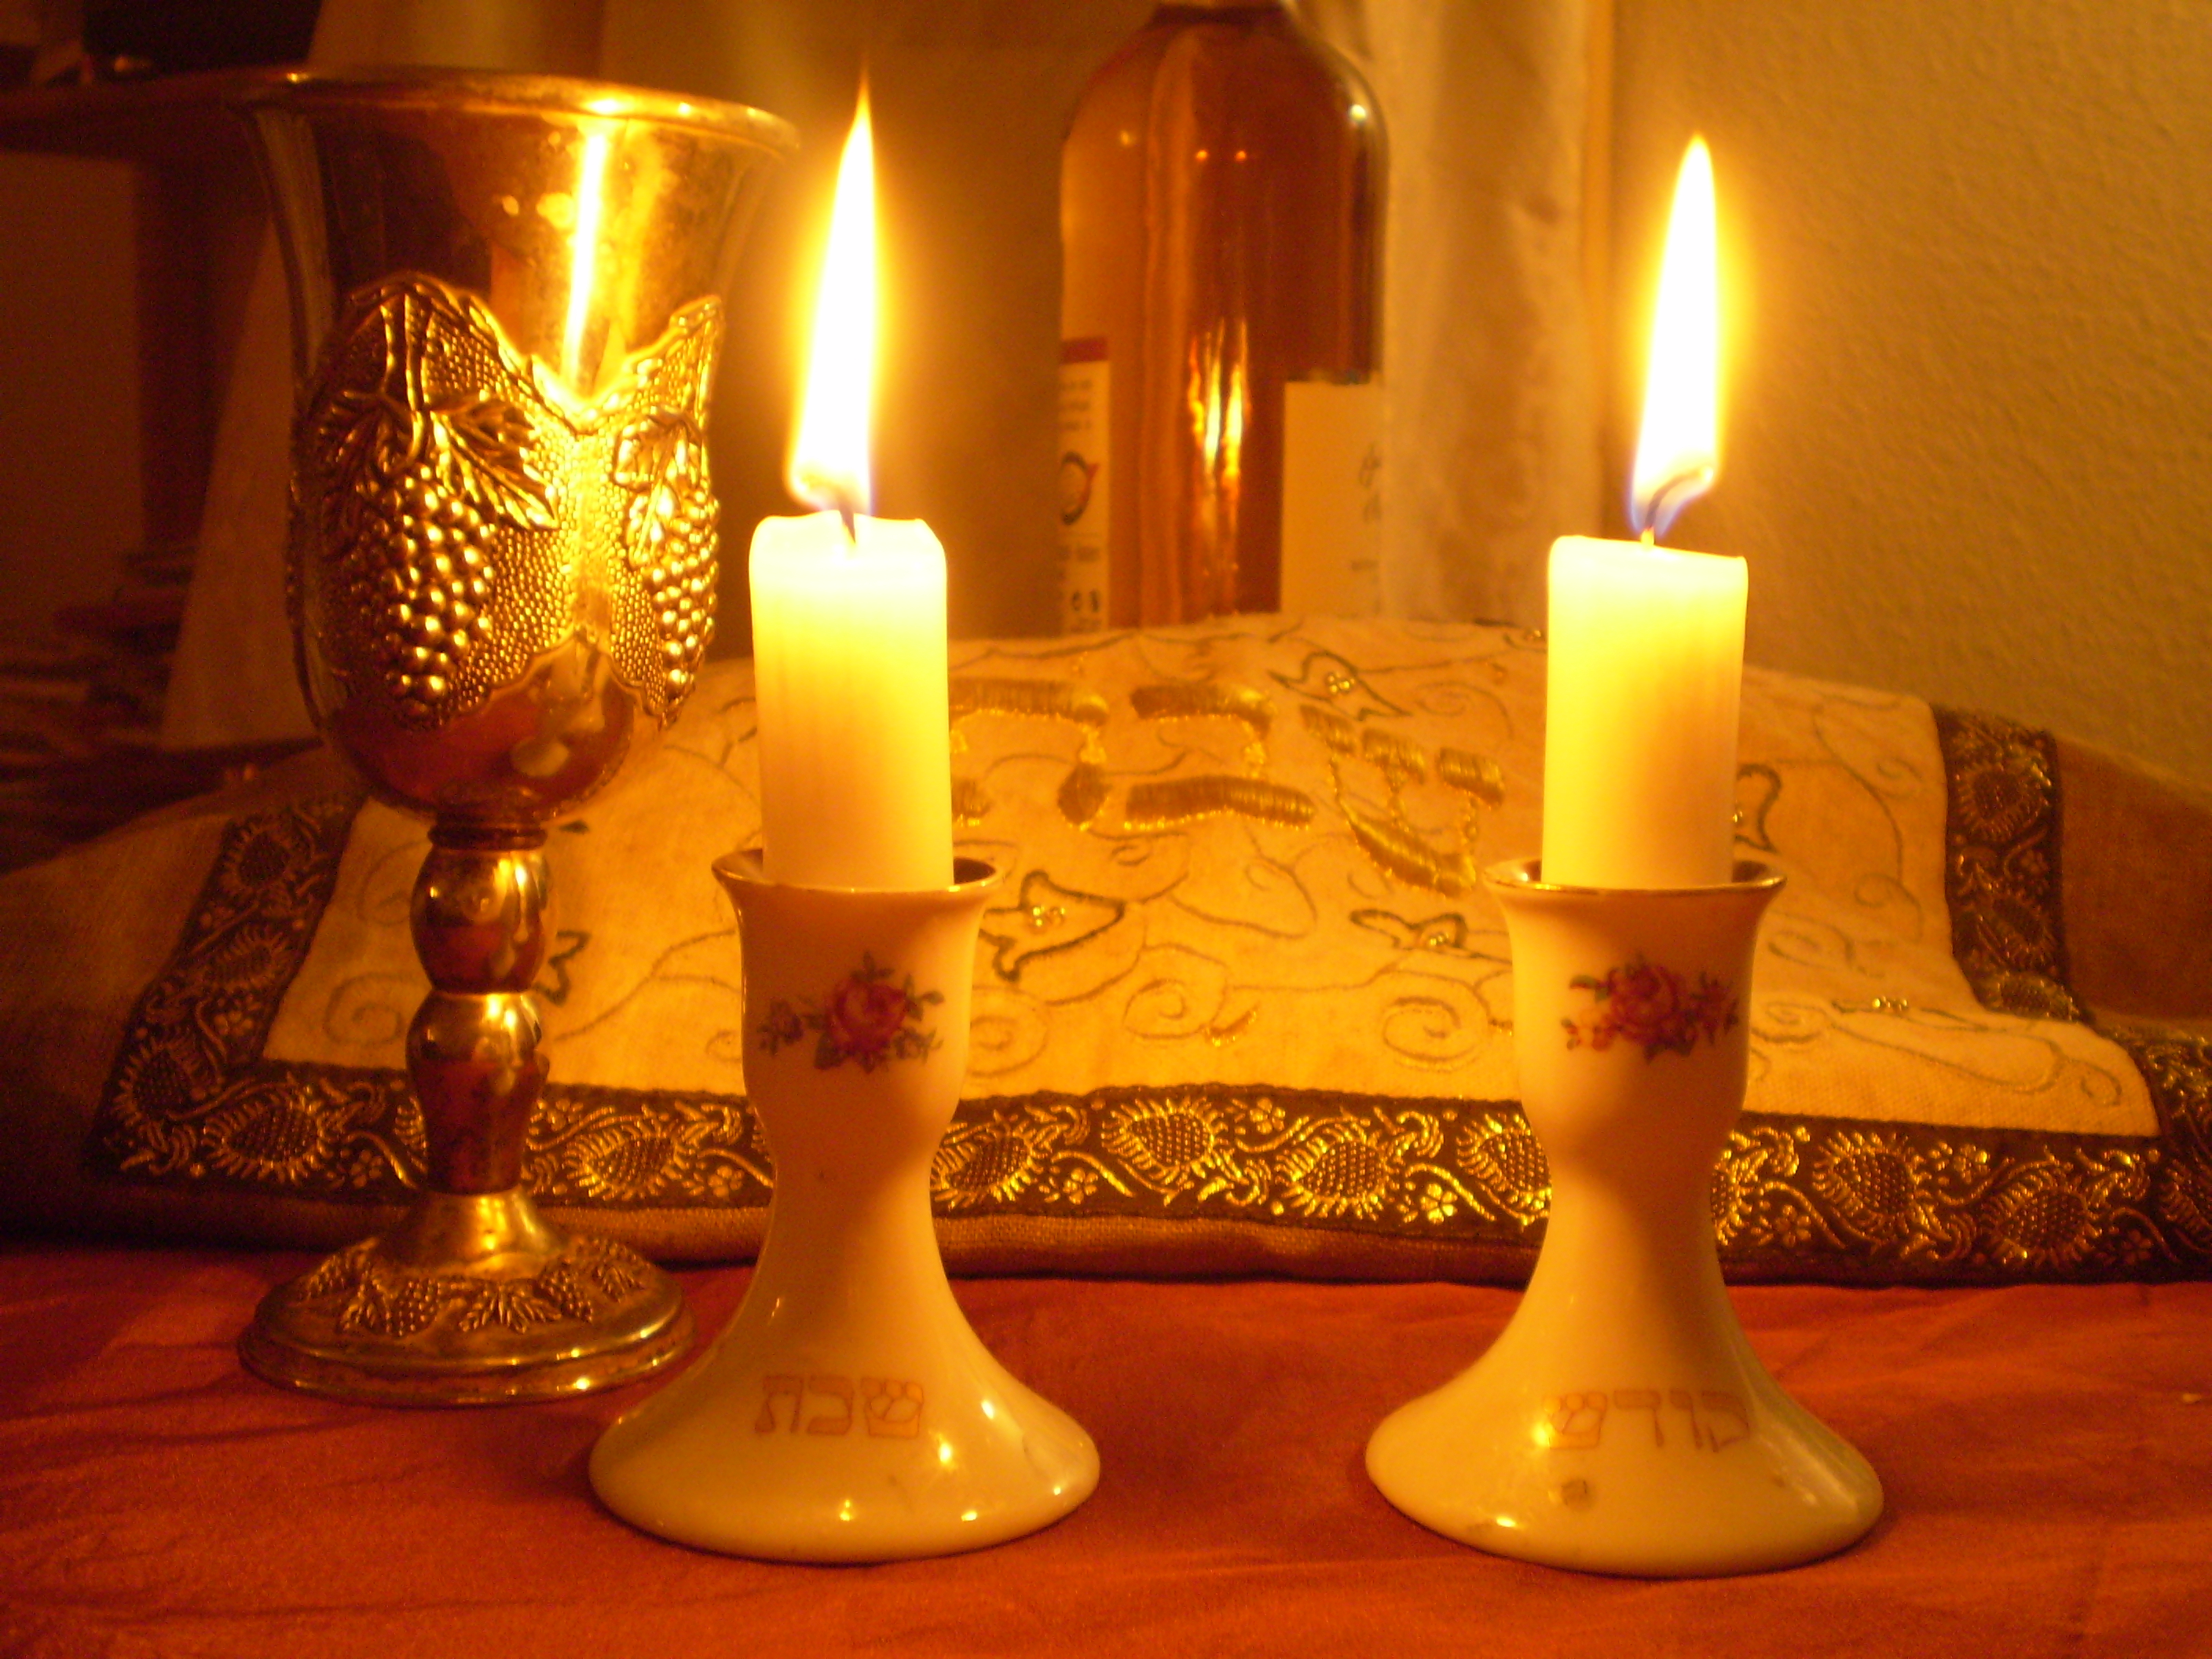 Shabbat Candle Lighting Blessing: Audio and Text